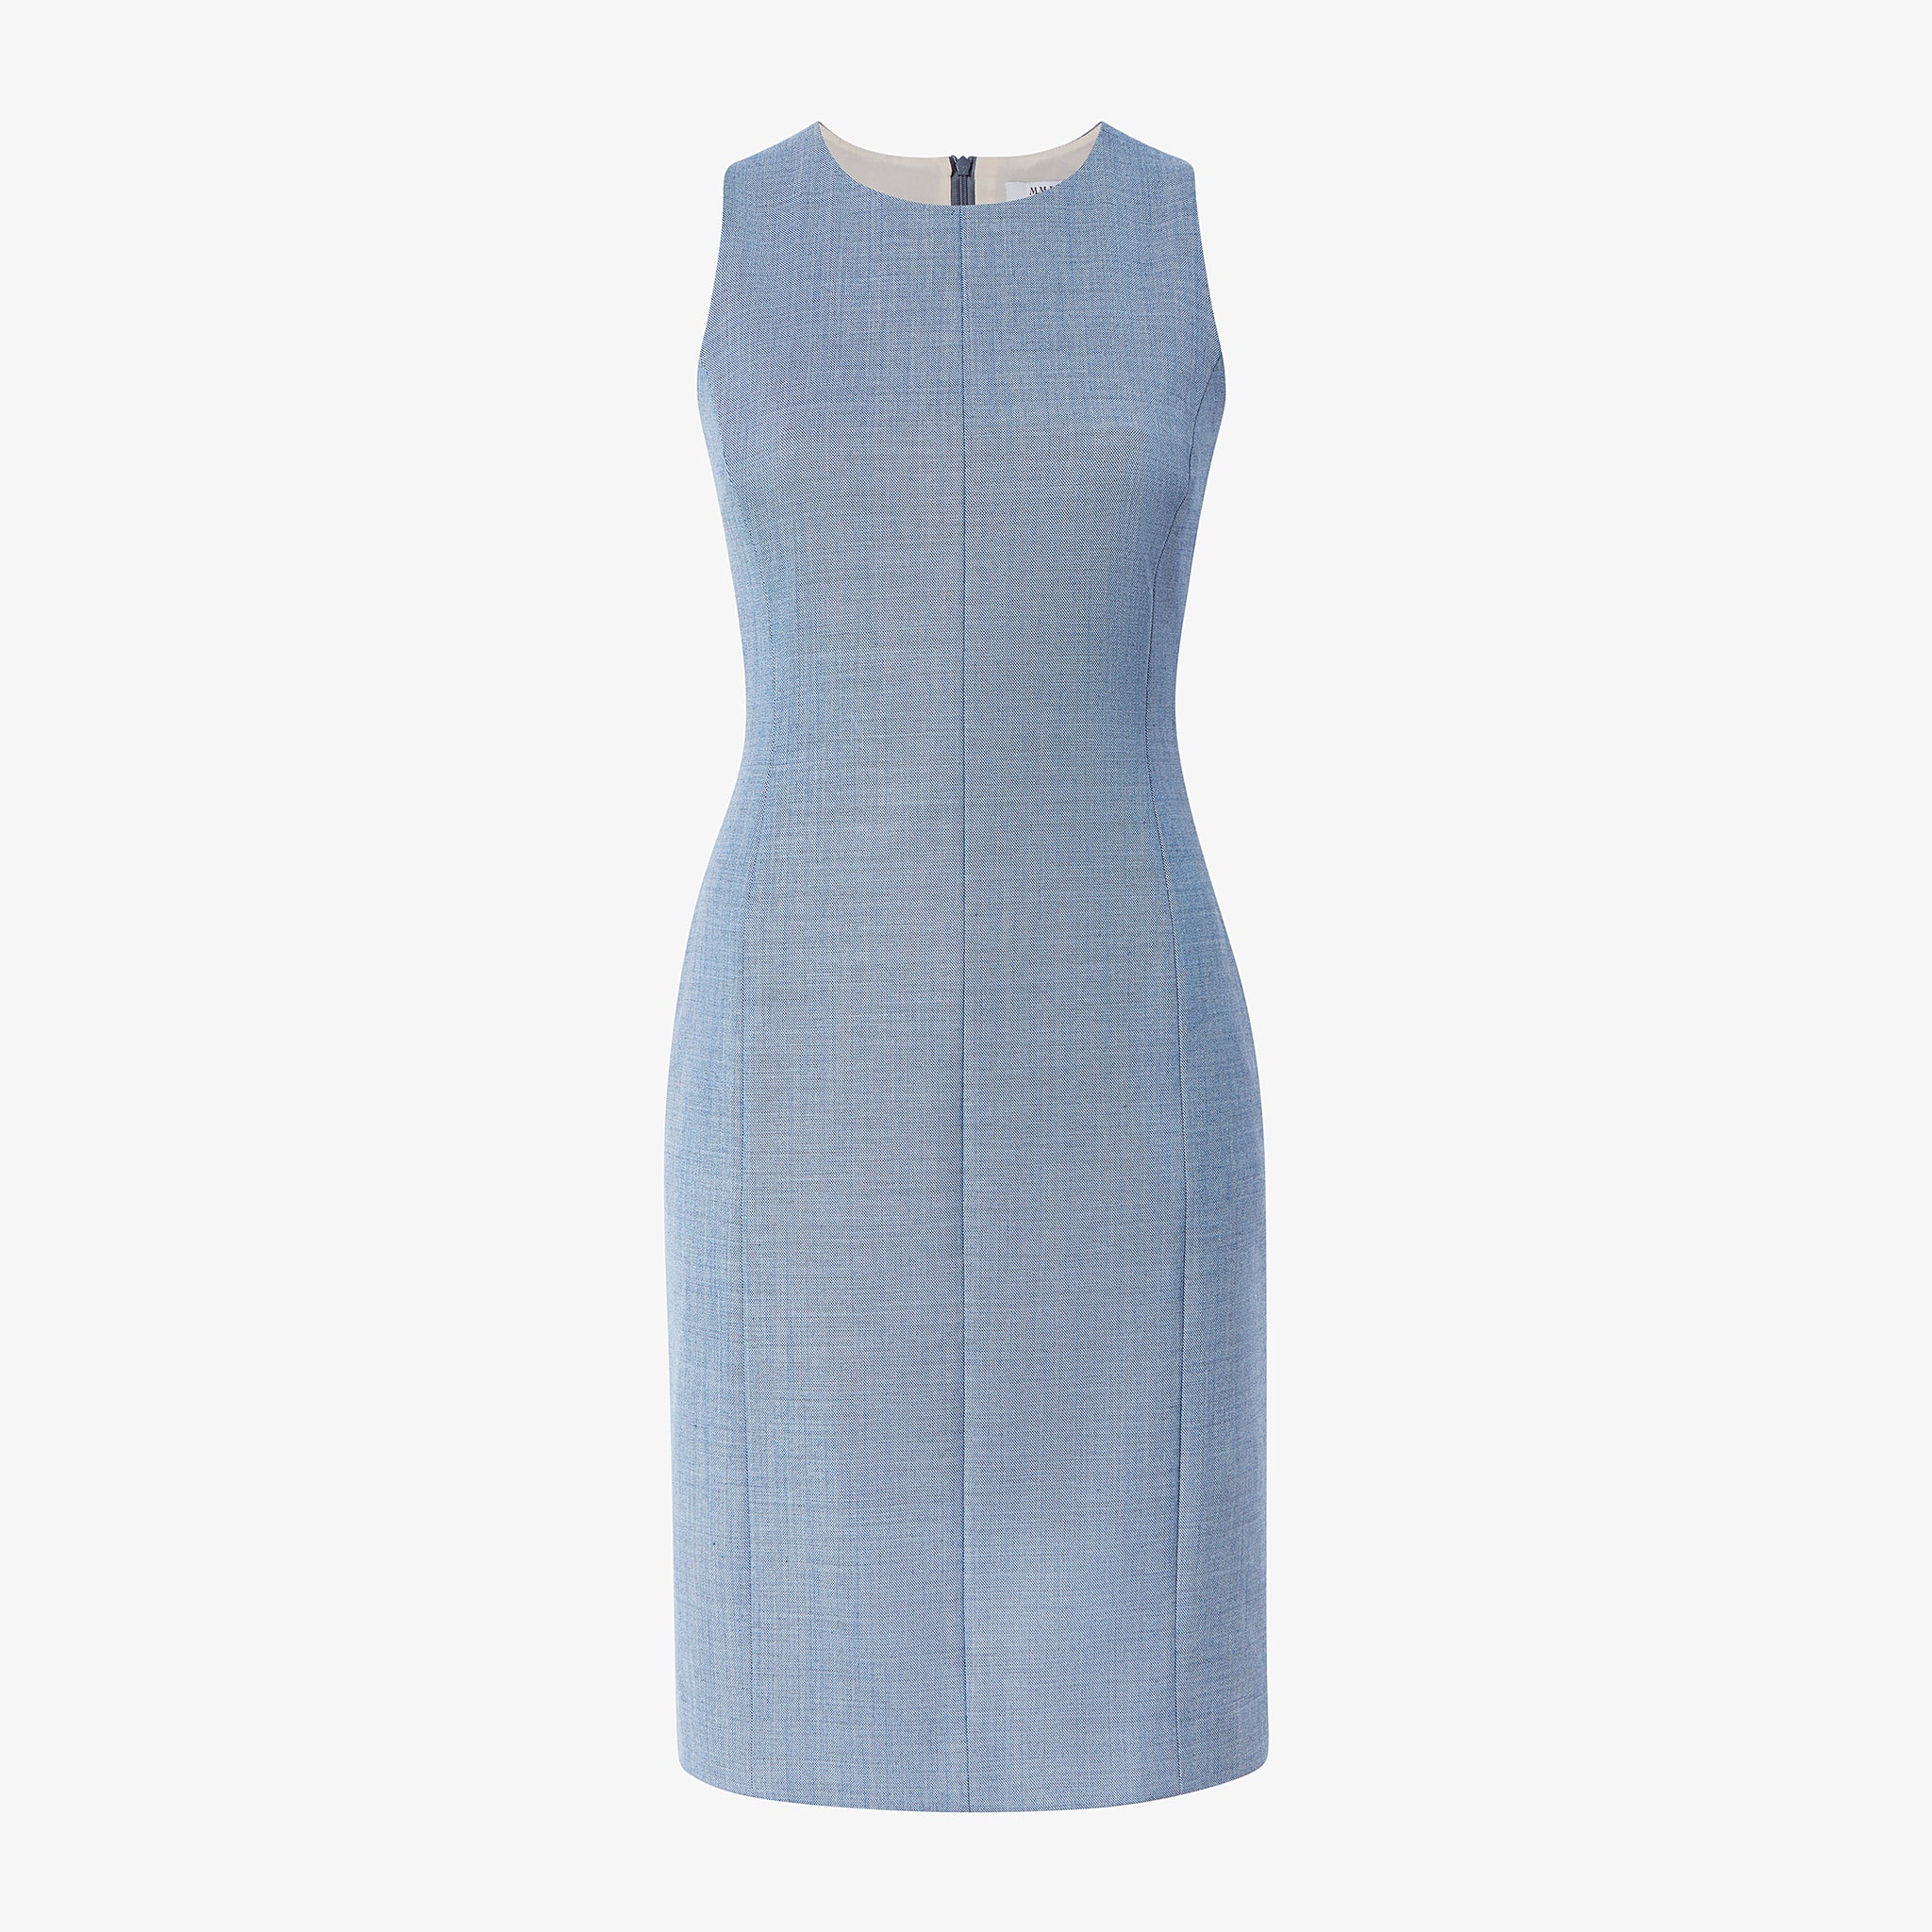 Packshot image of the constance dress in indigo and white